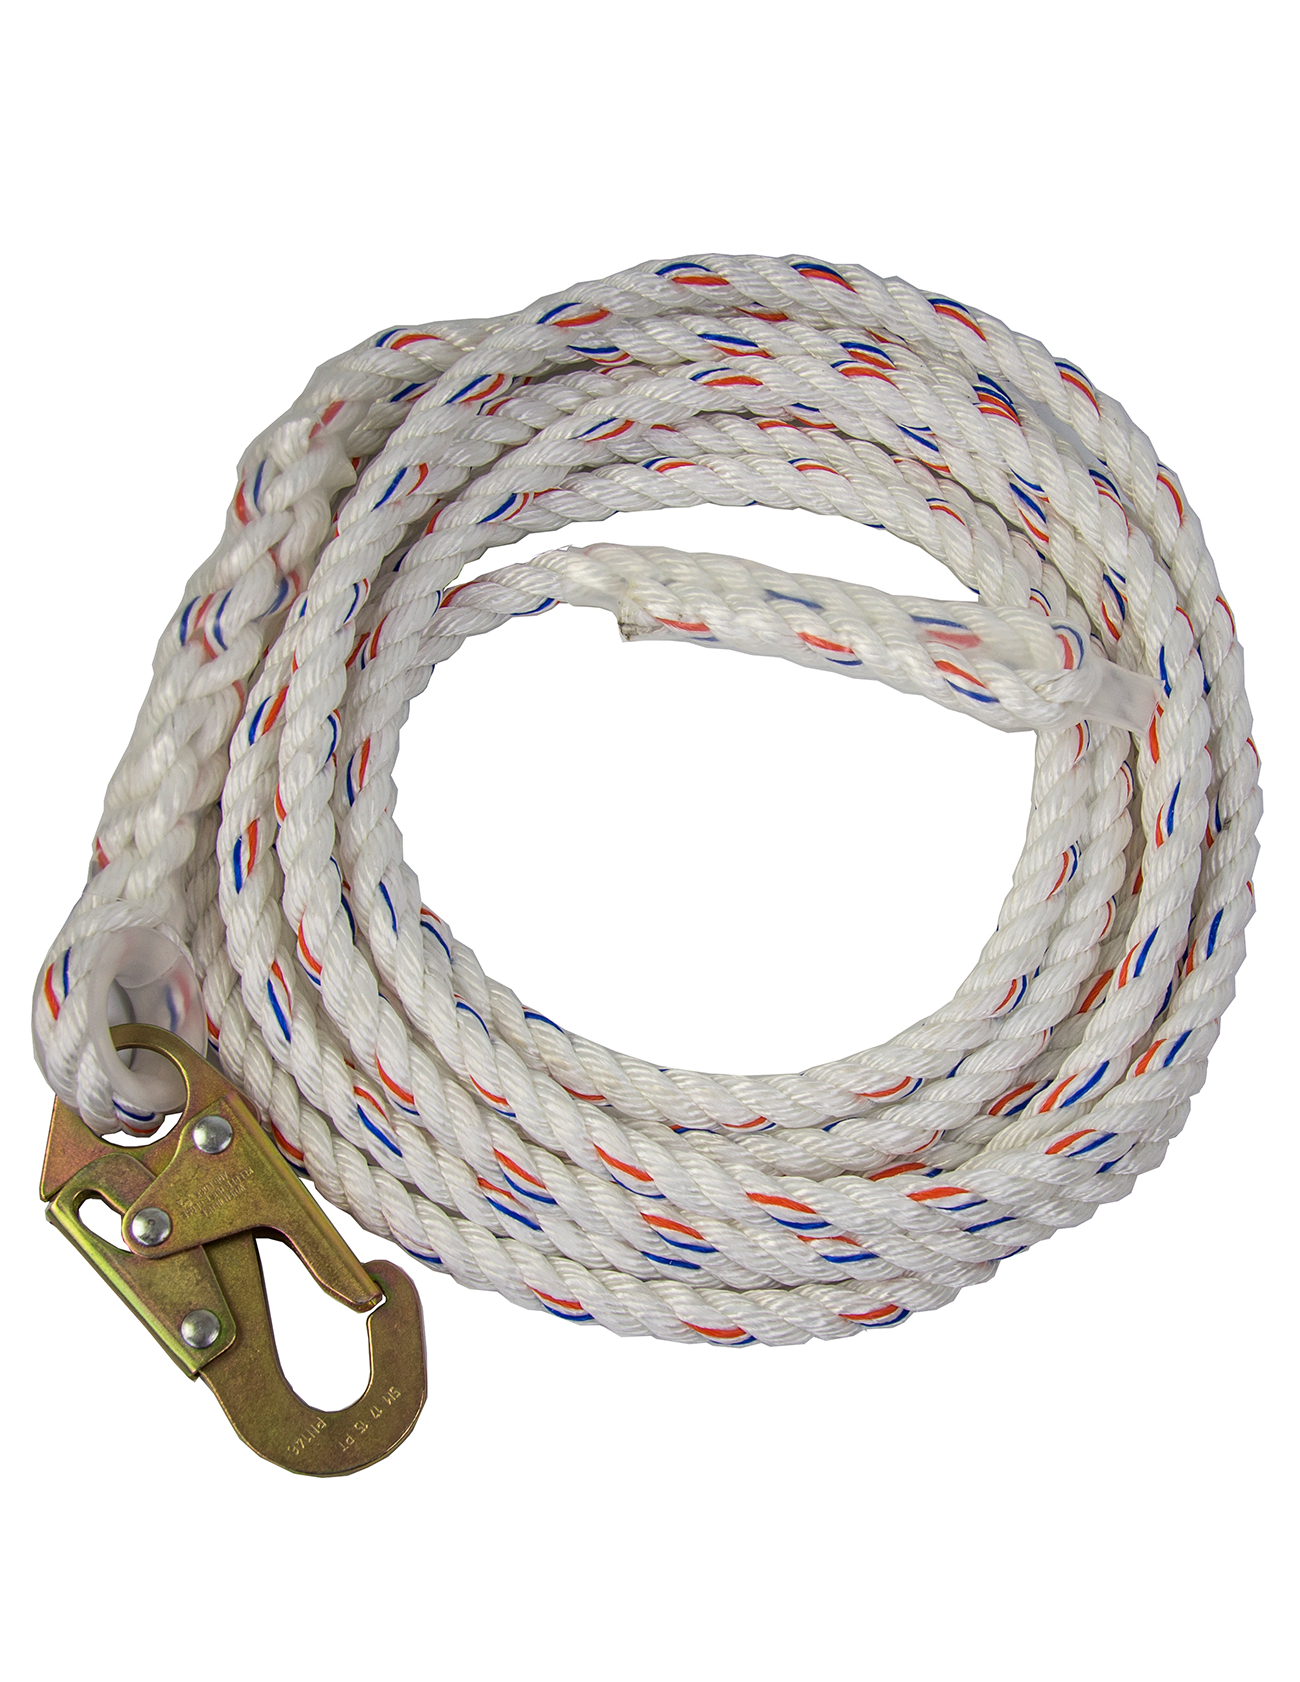 https://www.engineeredfallprotection.com/store/images/thumbs/0001841_guardian-polydac-rope-vertical-lifeline-w-snap-hook-end.png